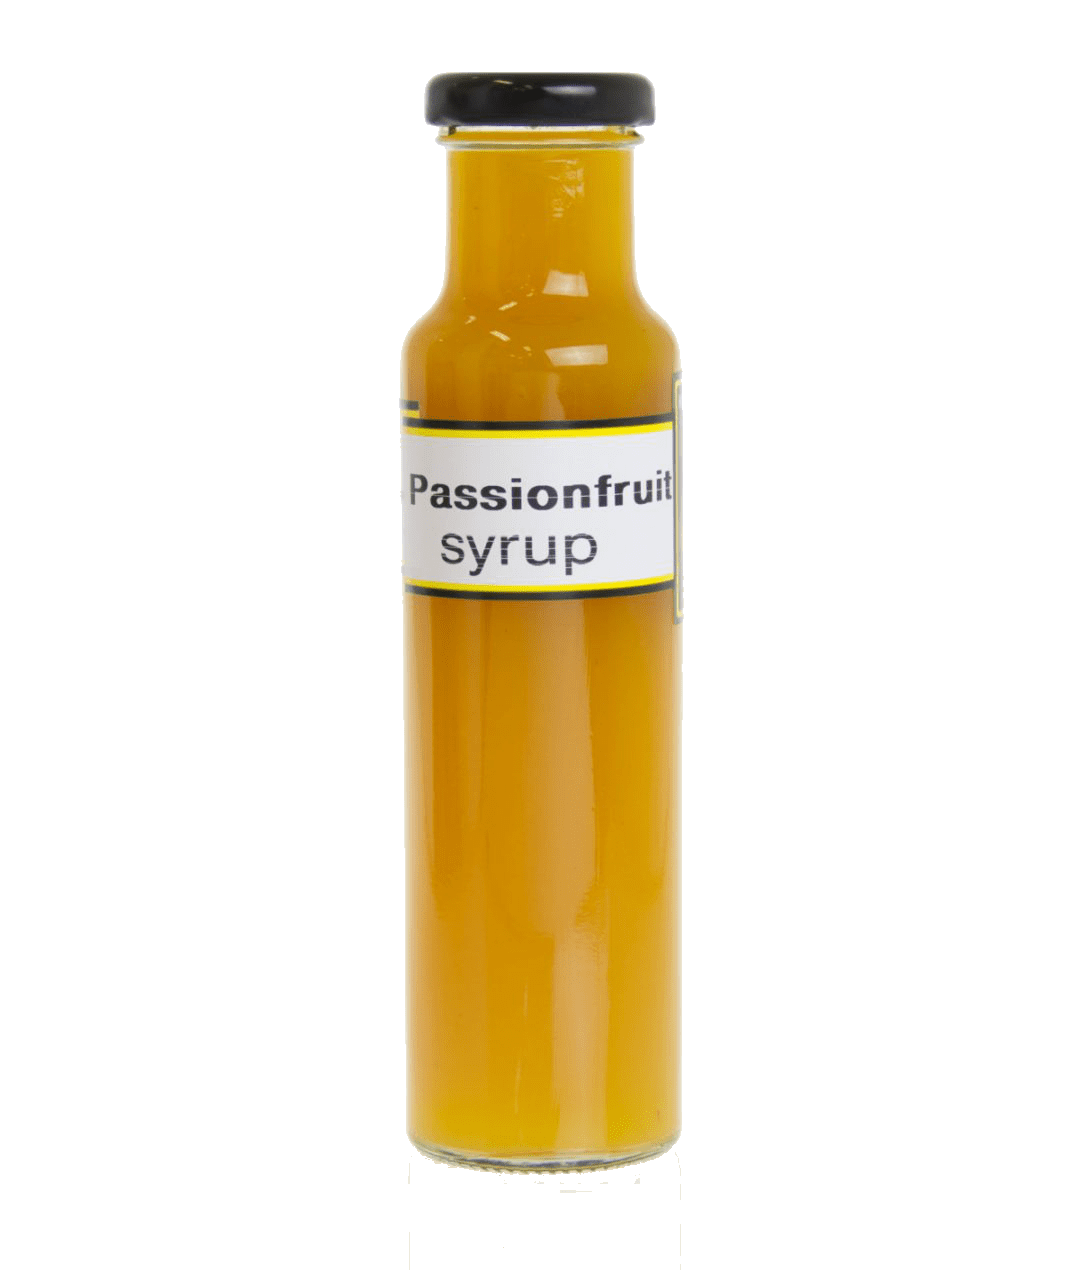 Passionfruit syrup